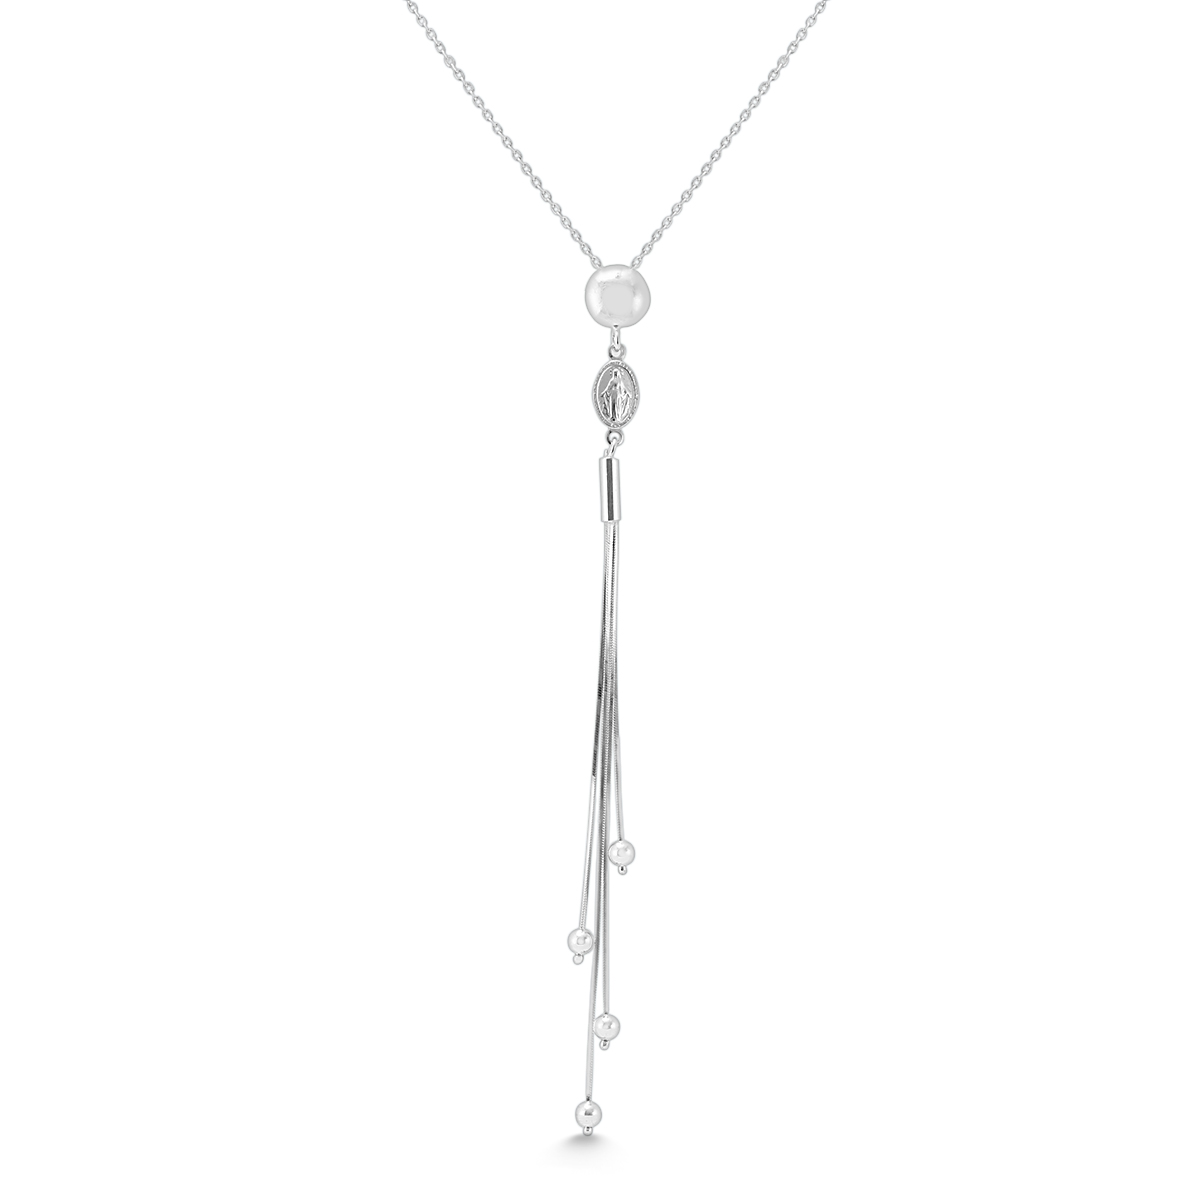 Virgin Mary and Cross Charm Necklace in .925 Sterling Silver